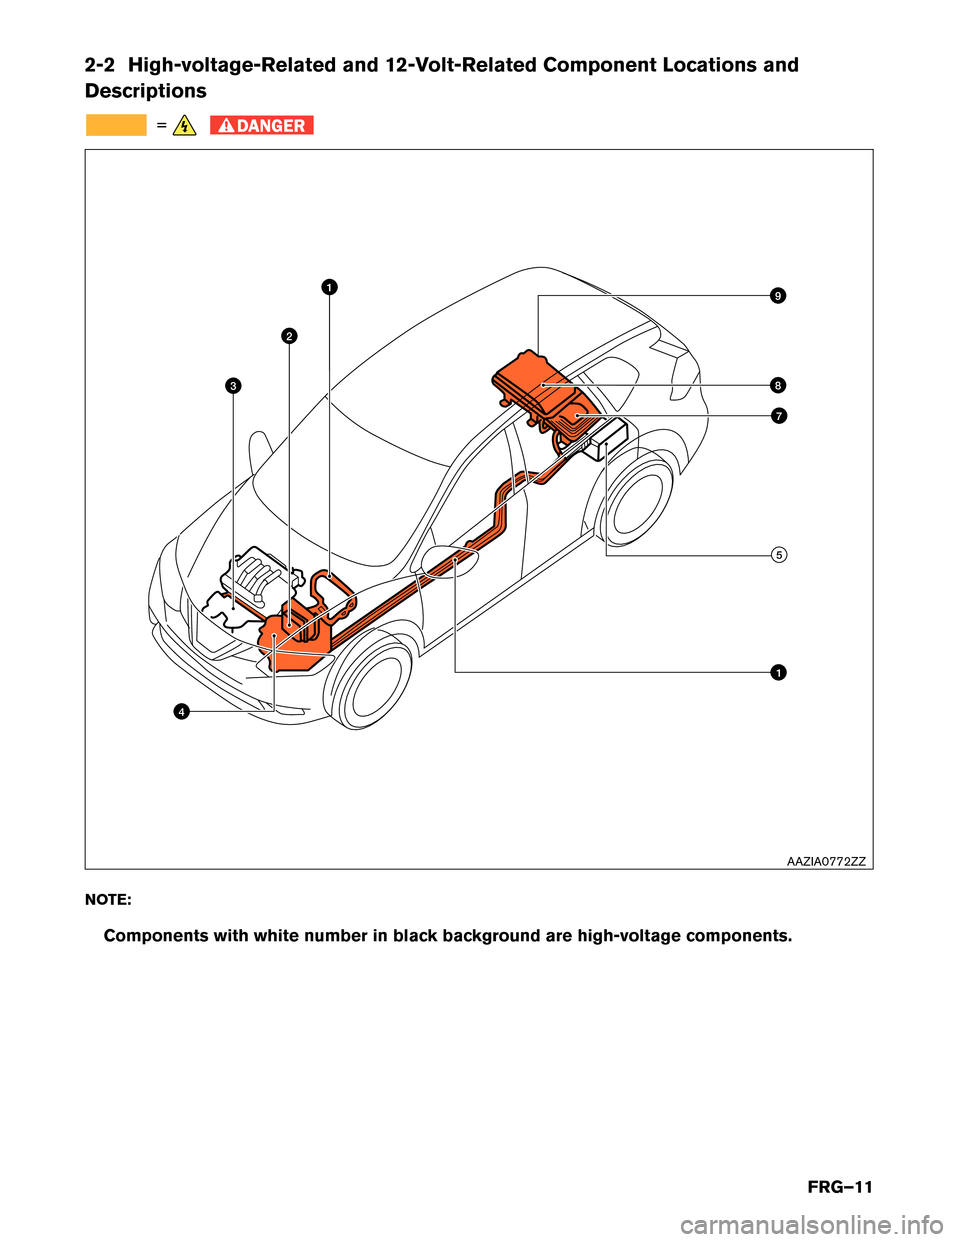 NISSAN ROGUE HYBRID 2017 2.G First Responders Guide 2-2 High-voltage-Related and 12-Volt-Related Component Locations and
Descriptions
=
DANGER
NOTE:
Components with white number in black background are high-voltage components. 8
7
4 1
2
3 9
15
AAZIA077